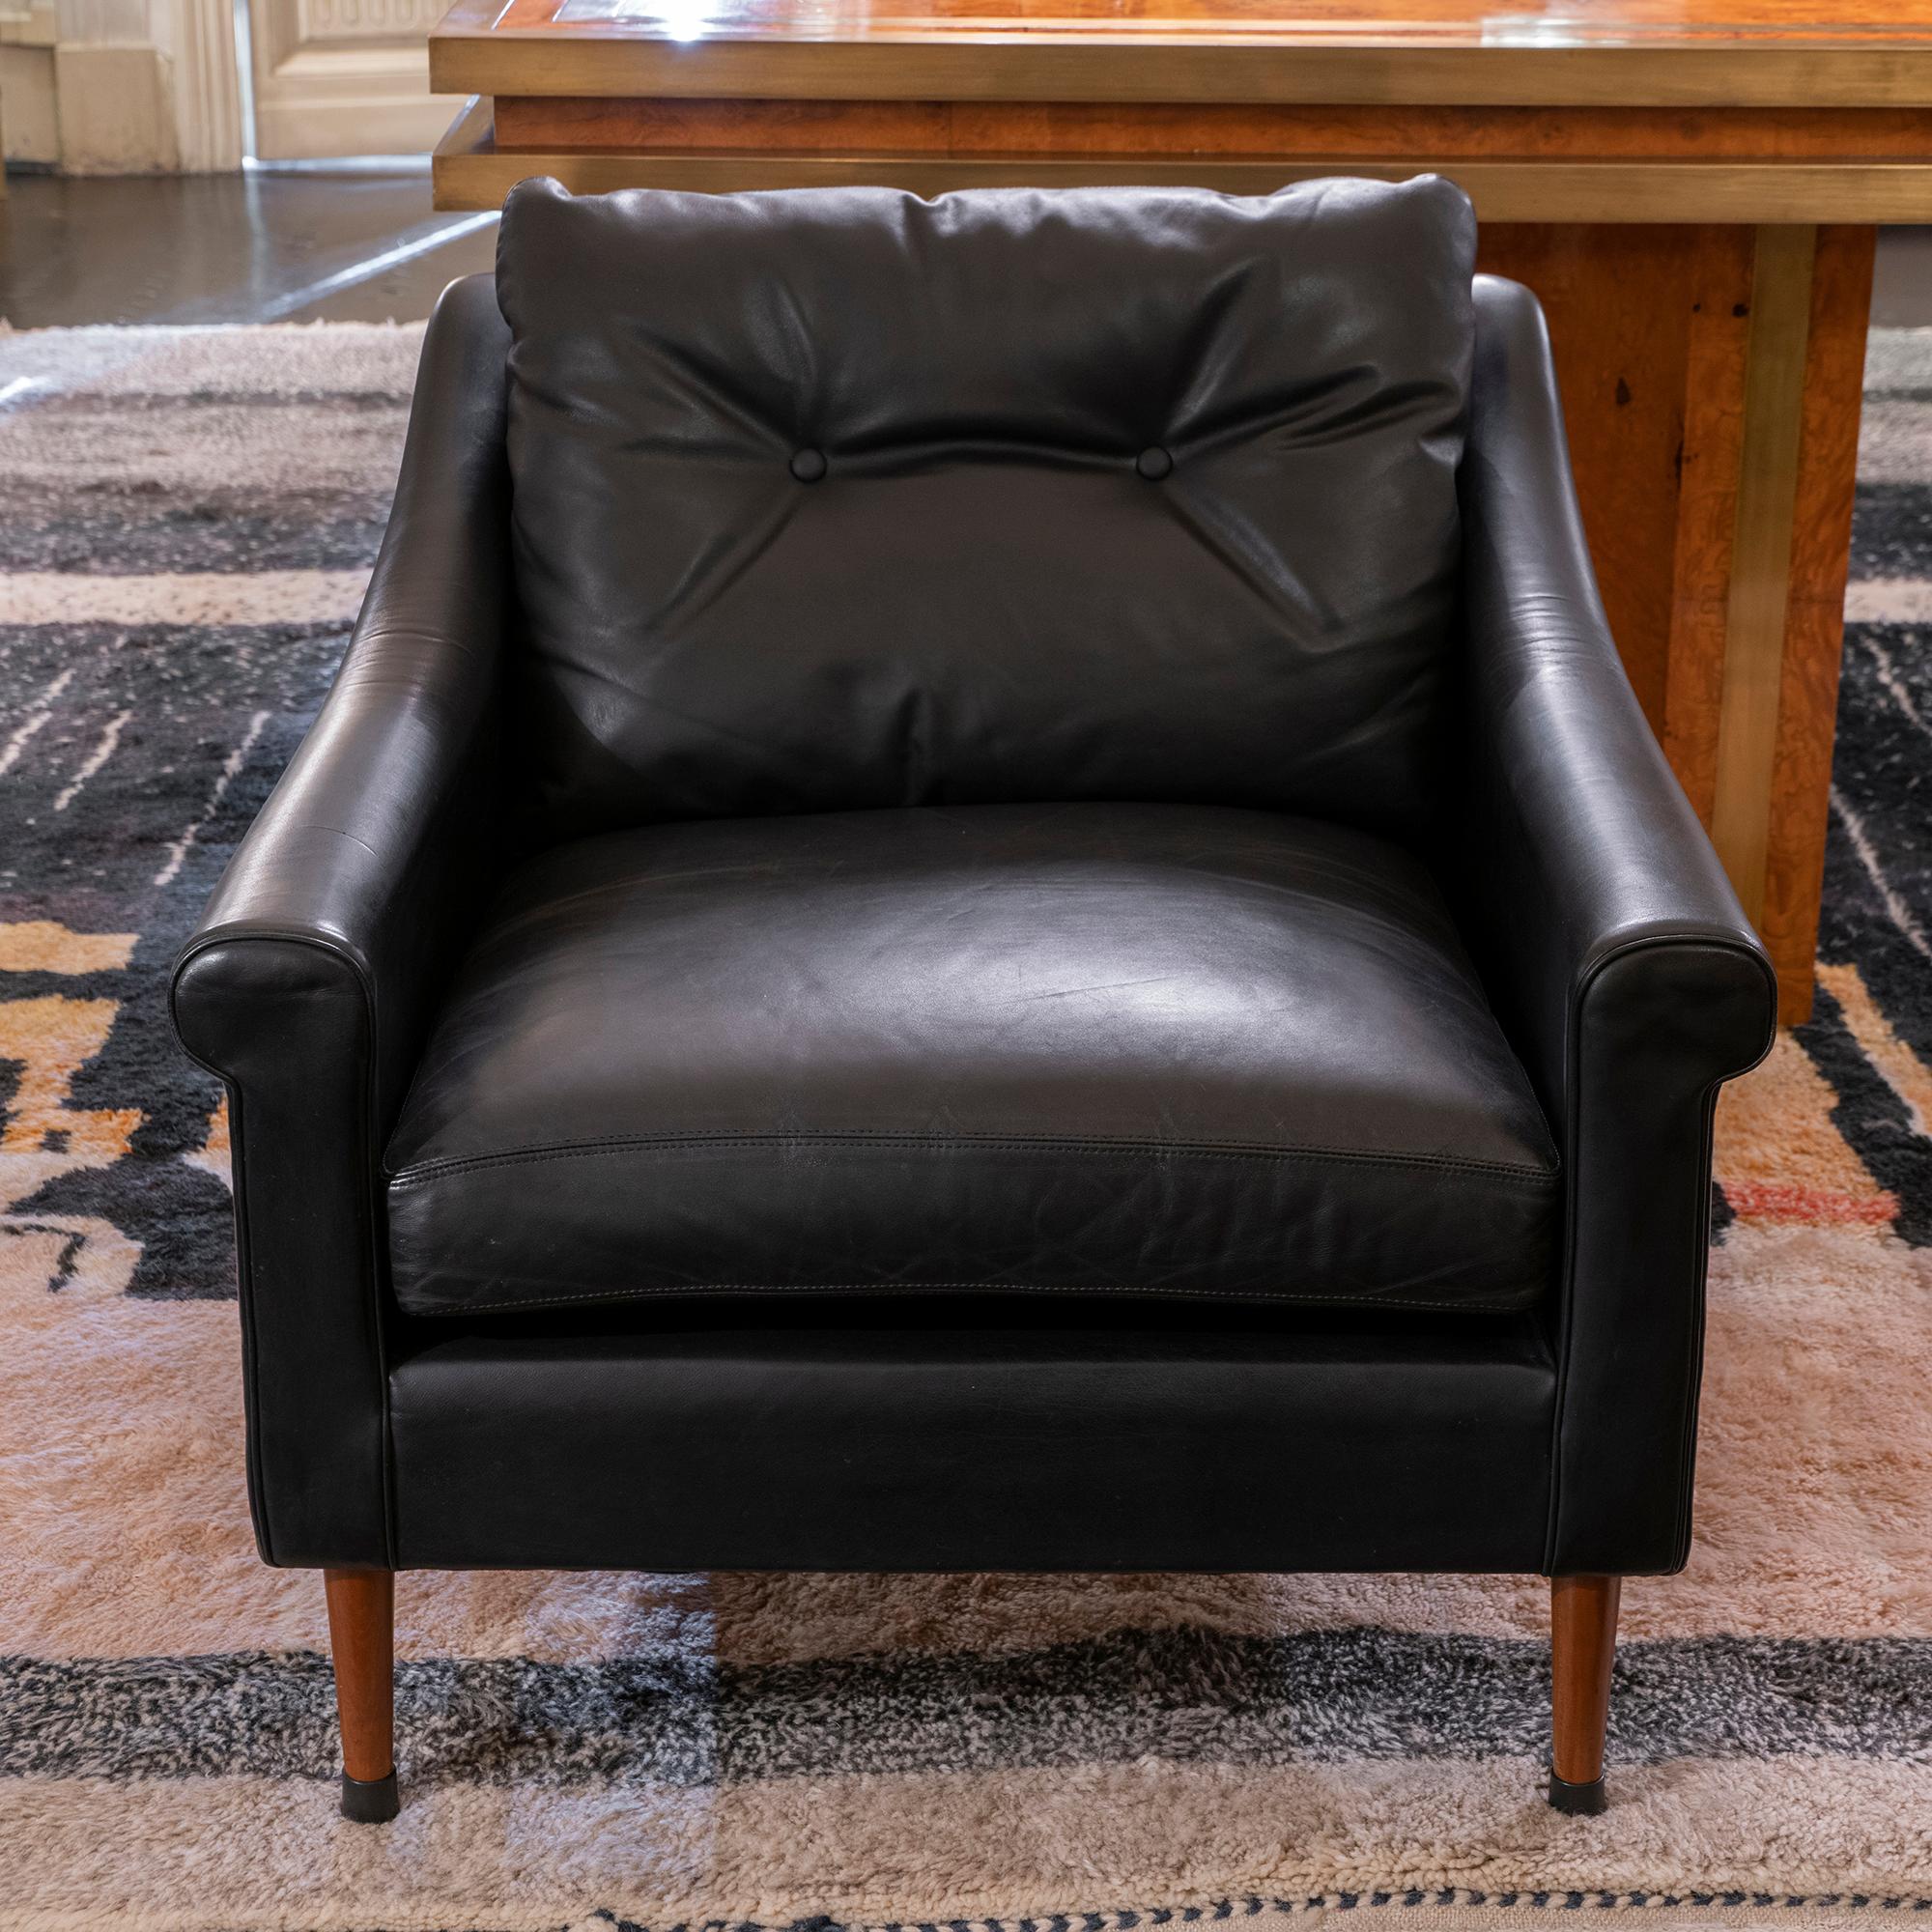 Pair of Mid-Century Modern armchairs, original black leather in perfect condition and vintage patina. Wood legs with original rubber caps, France, circa 1950s.